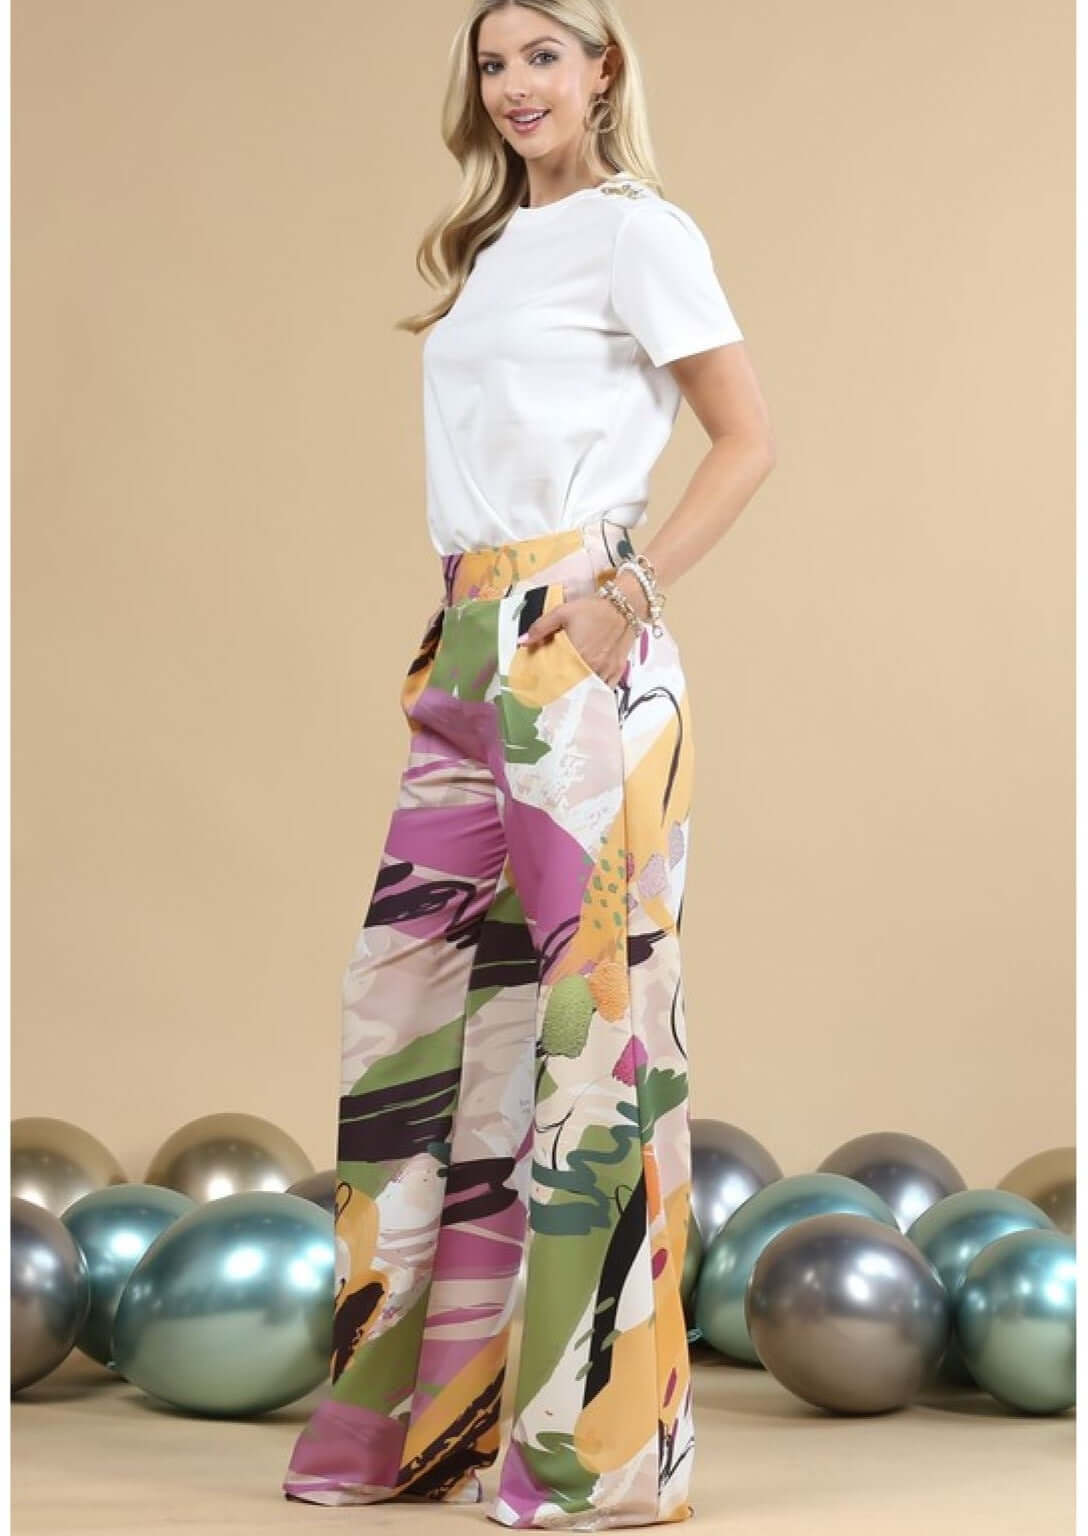 Made in USA Artistic Retro Printed High Waist Pleated Pants with Side Zipper | Classy Cozy Cool Women's Made in America Boutique